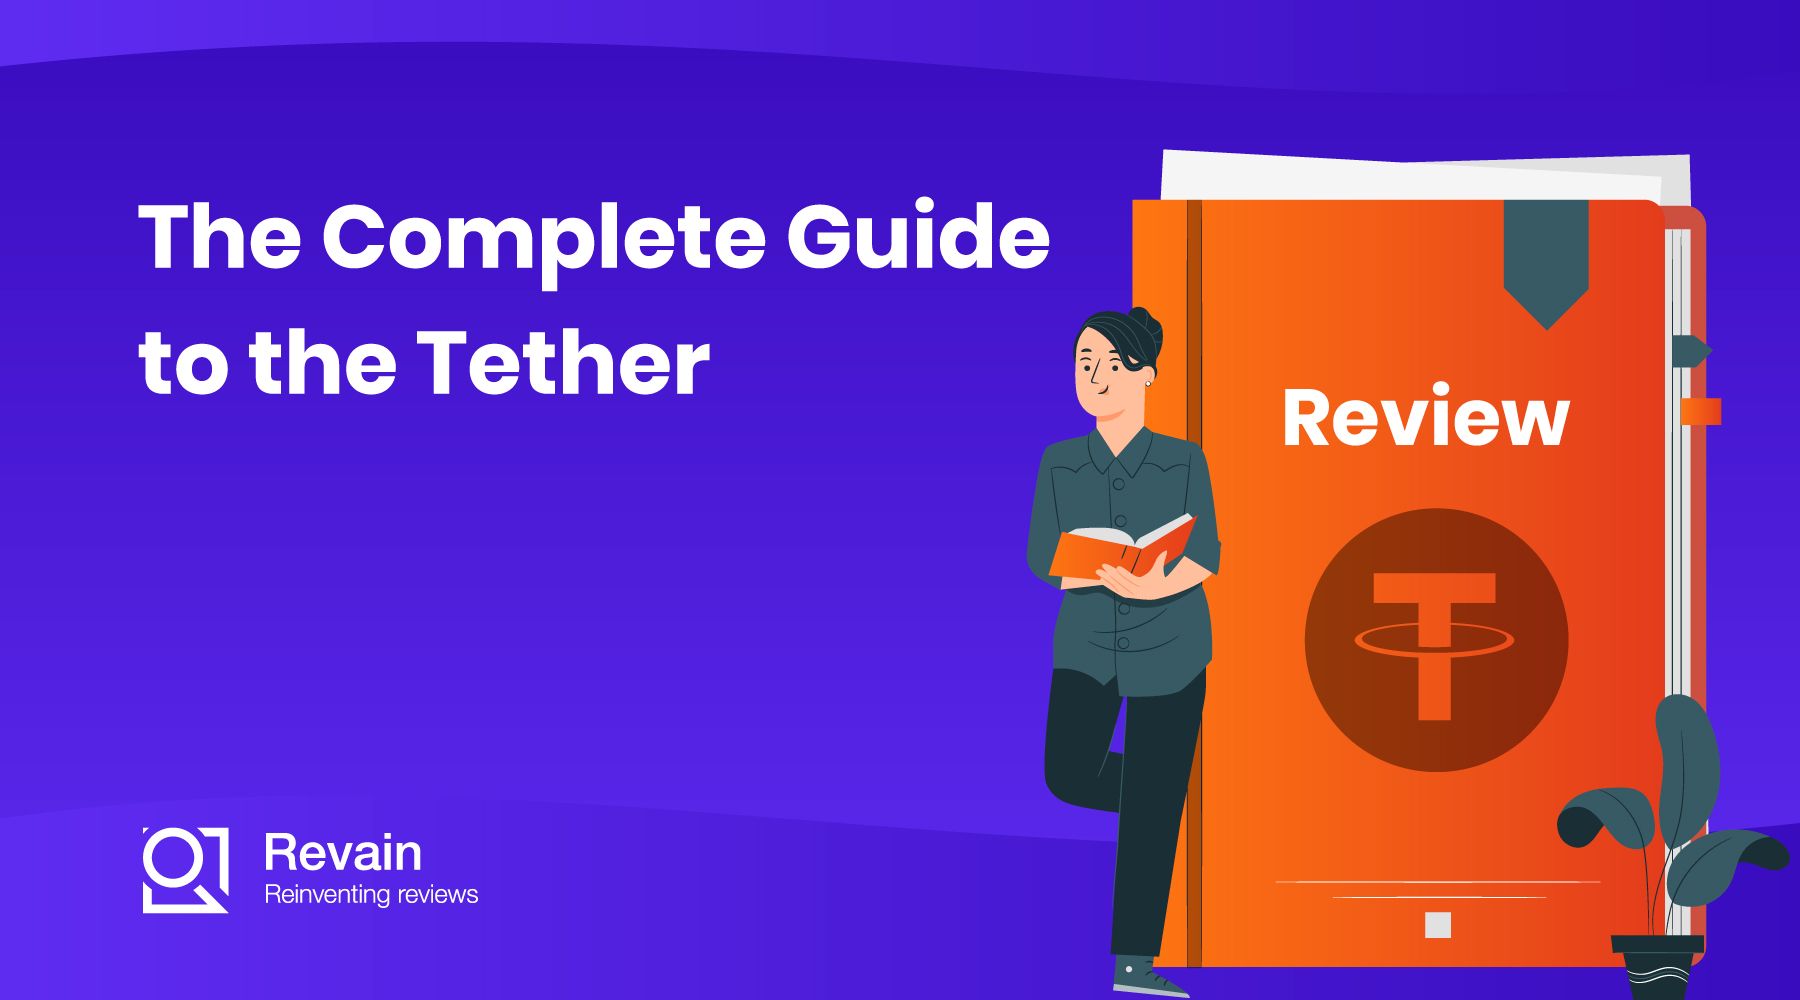 Article The Complete Guide to the Tether